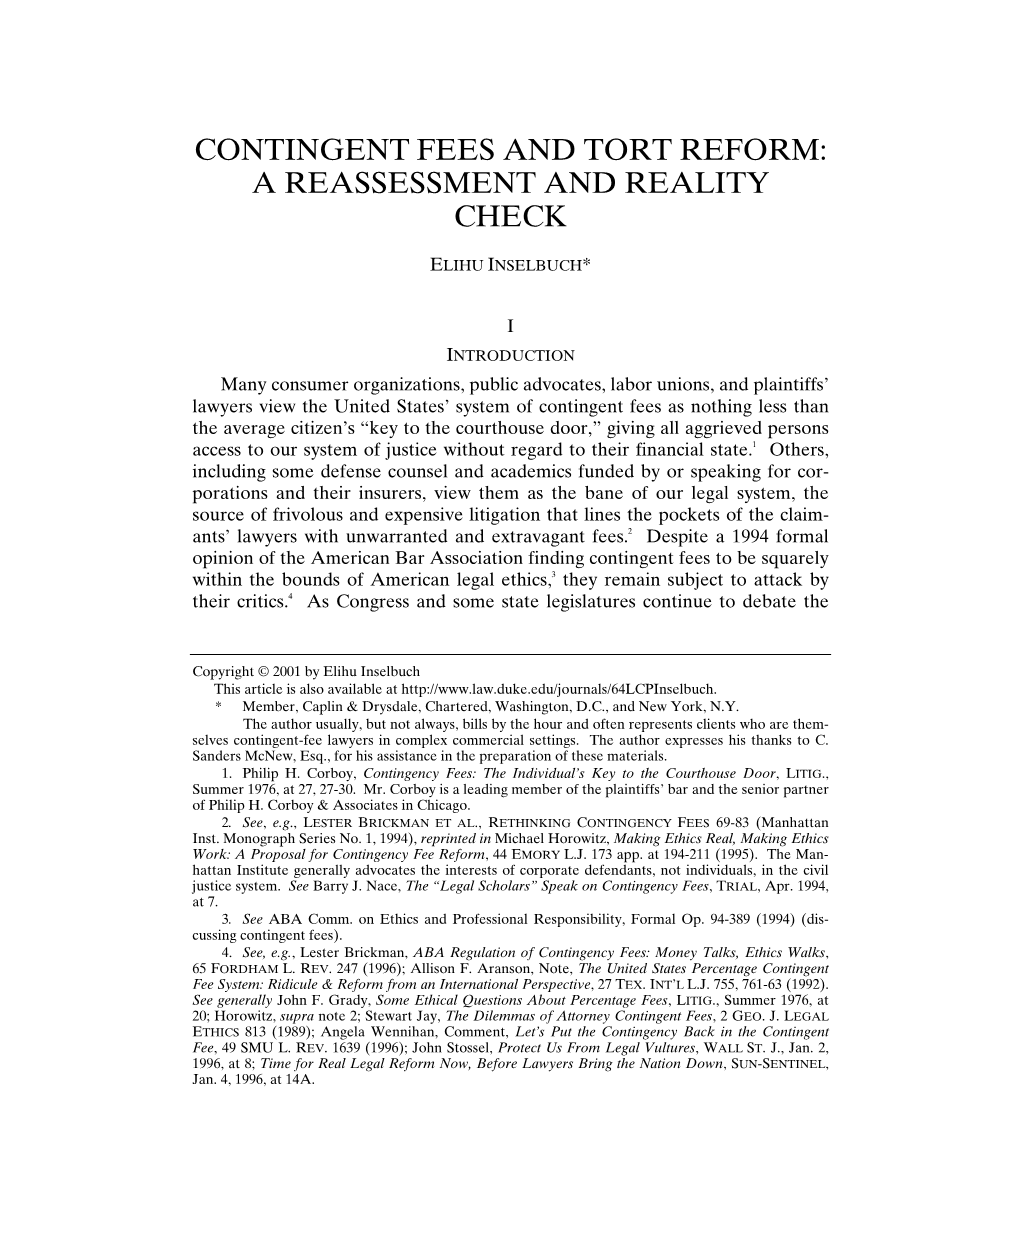 Contingent Fees and Tort Reform: a Reassessment and Reality Check